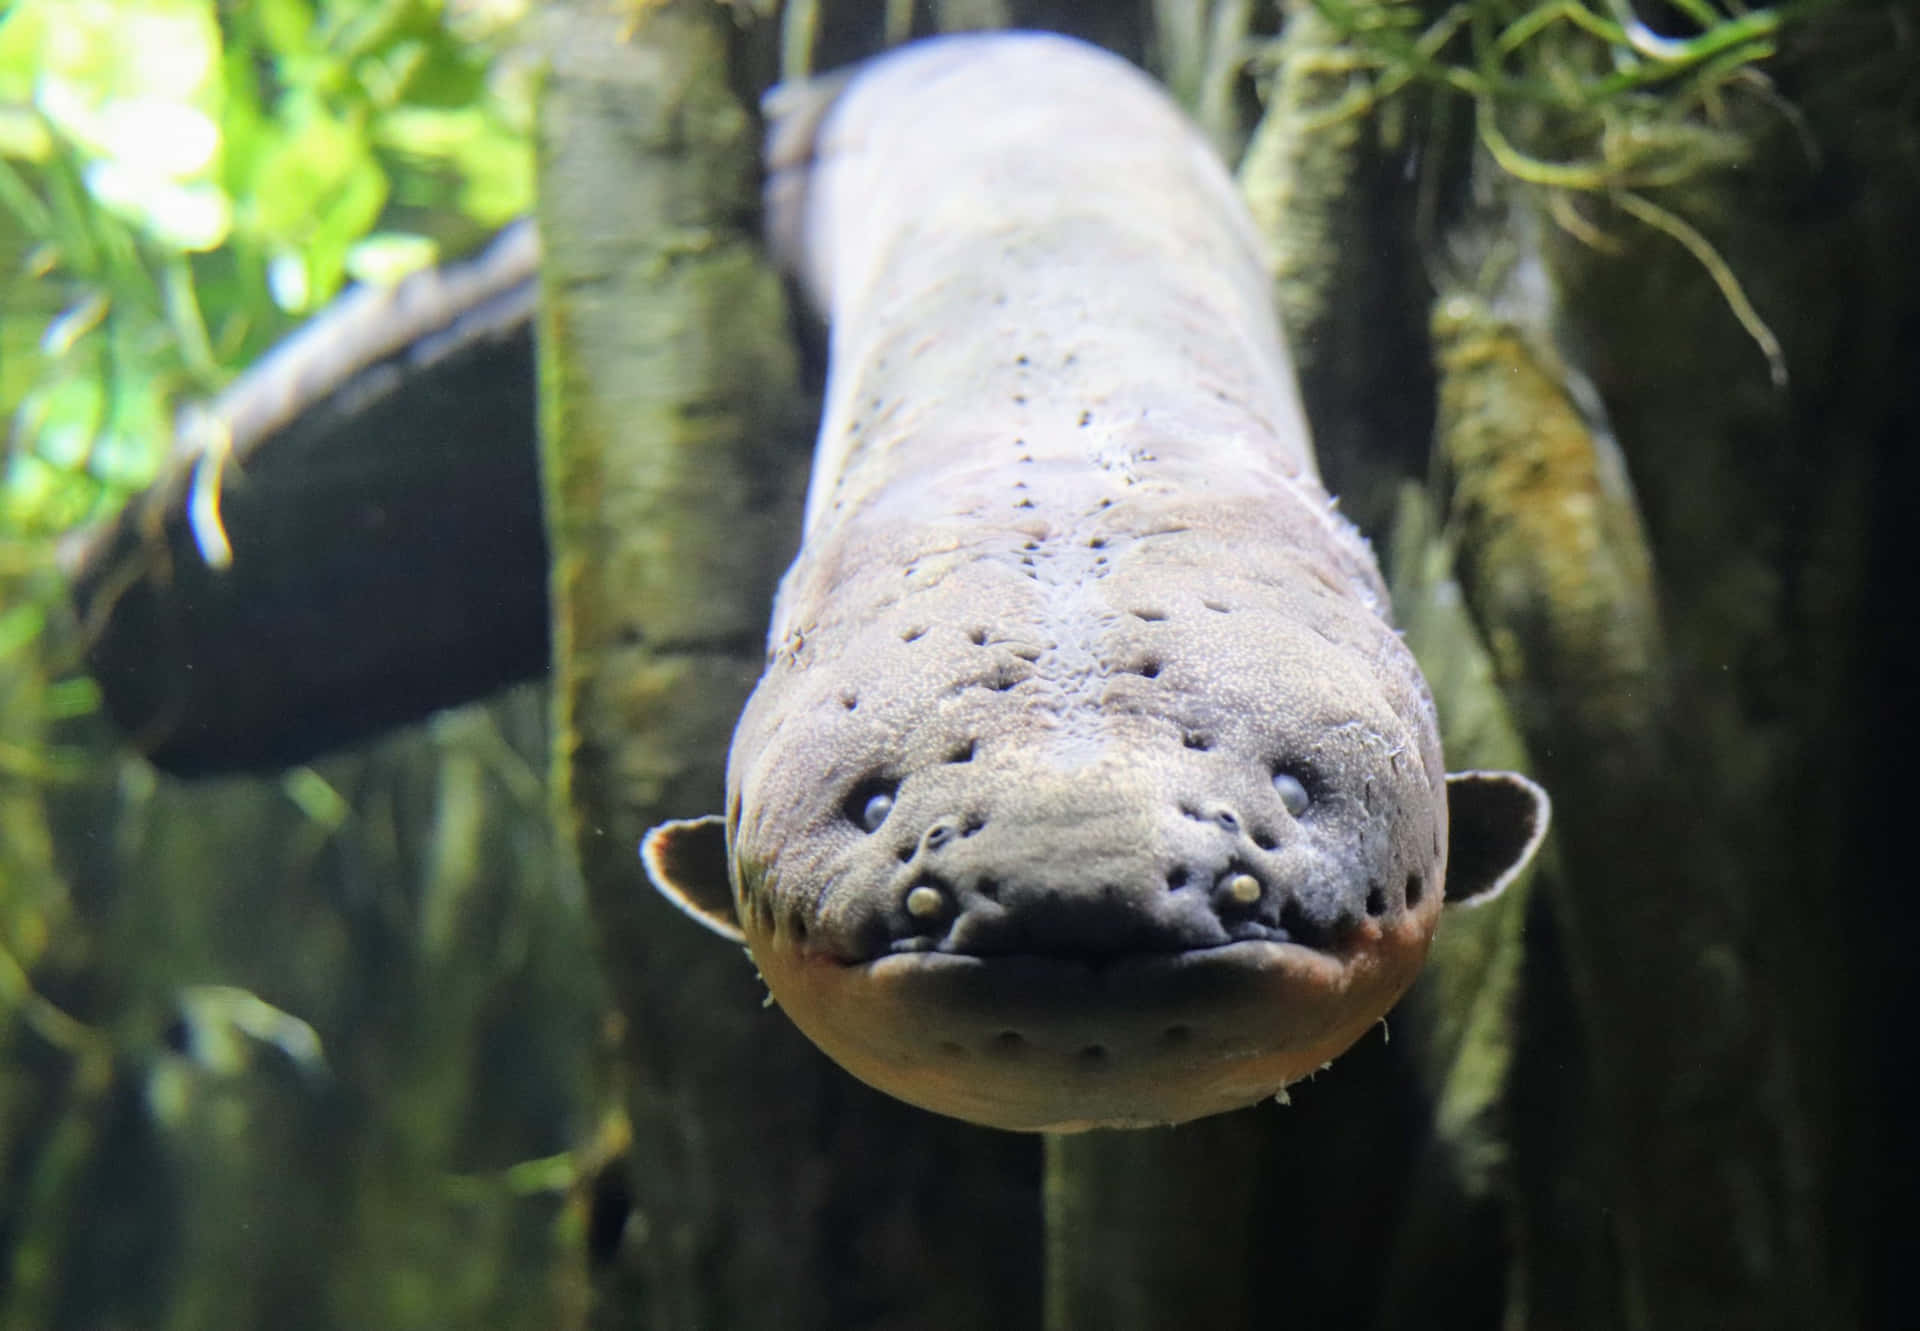 Electric eels, a species of fish that can generate powerful electric shocks, swimming in their natural habitat.